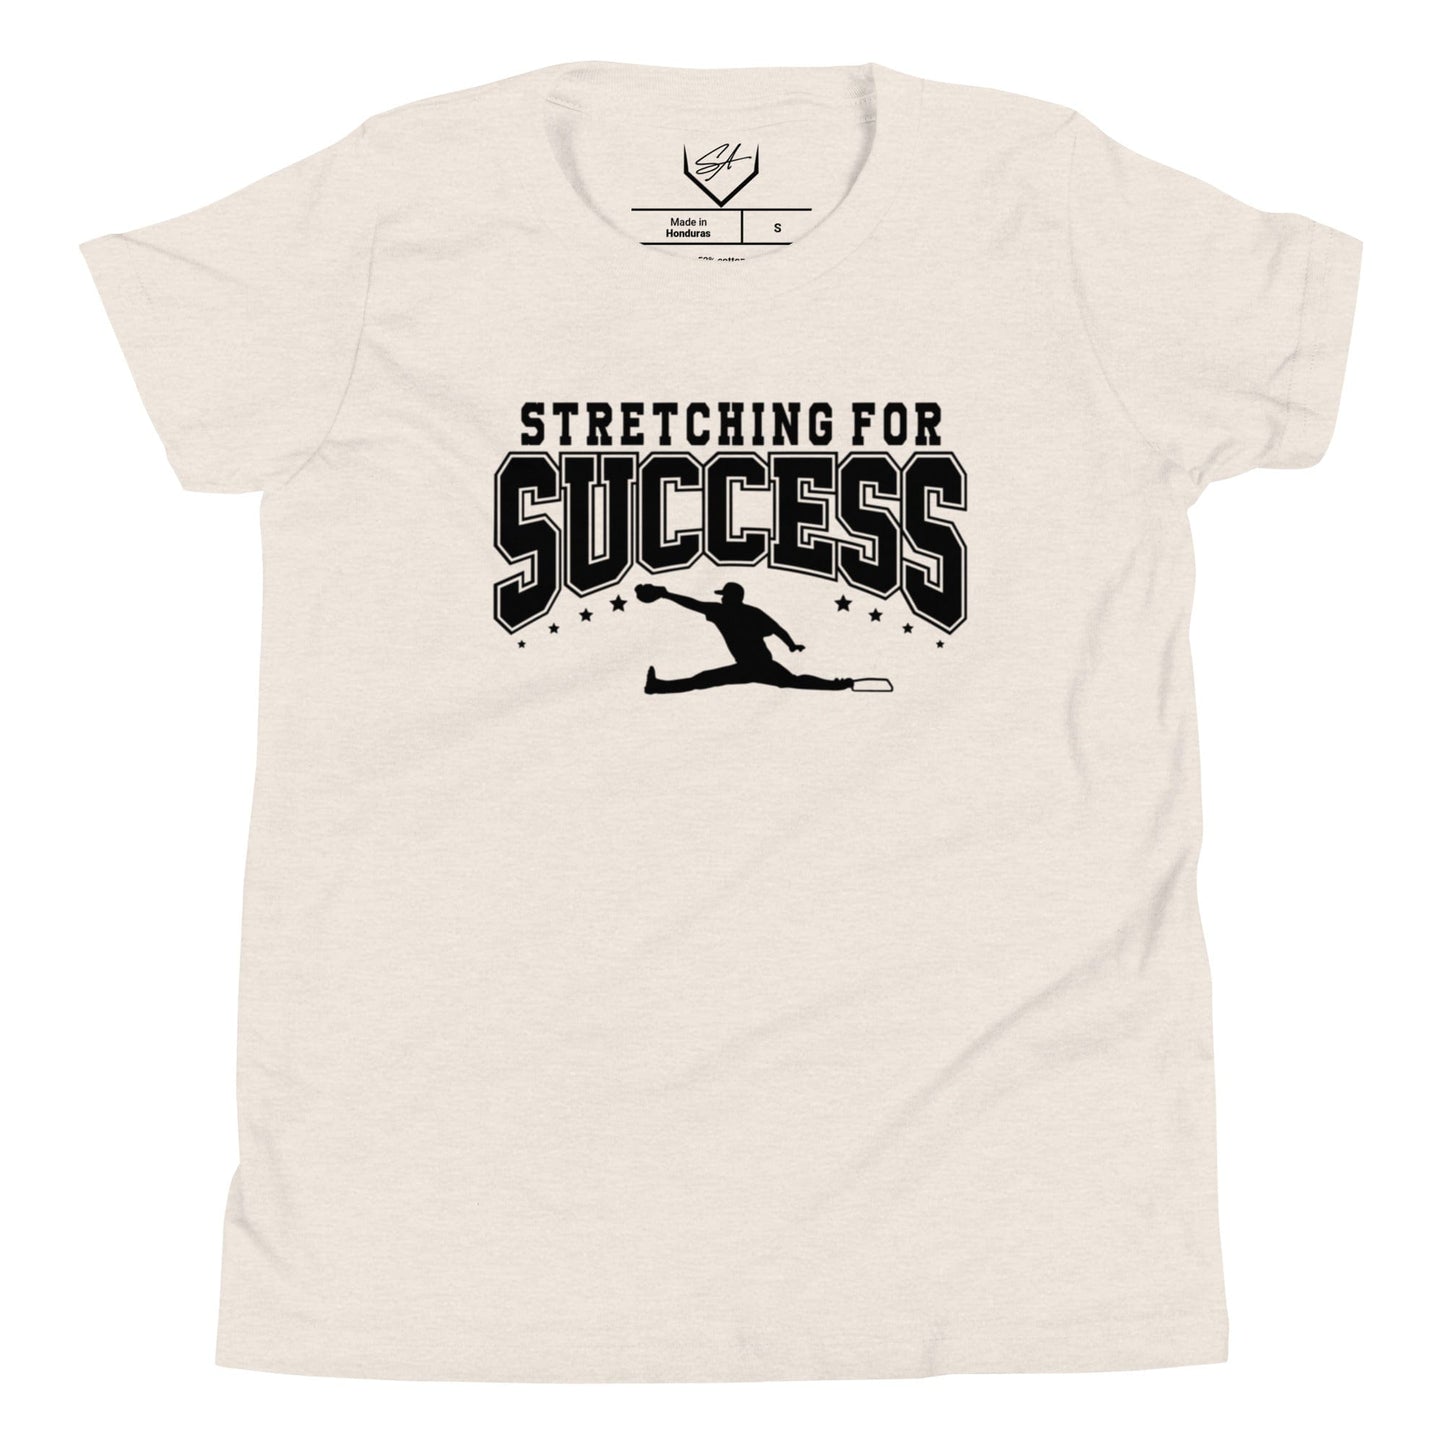 Stretching For Success - Youth Tee